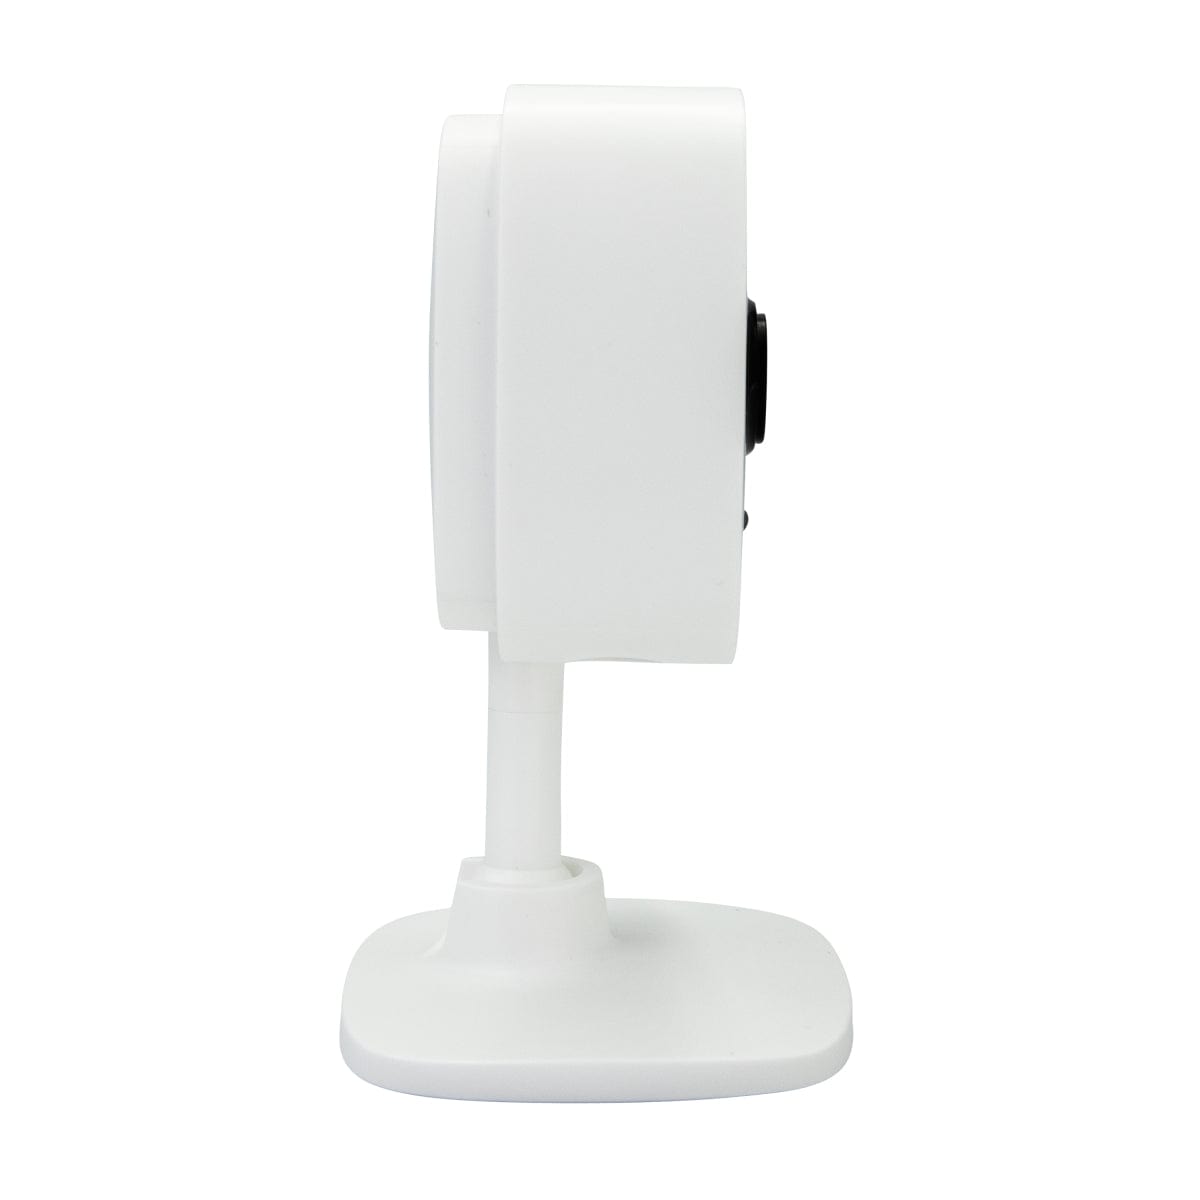 Tapo C110, Home Security Wi-Fi Camera